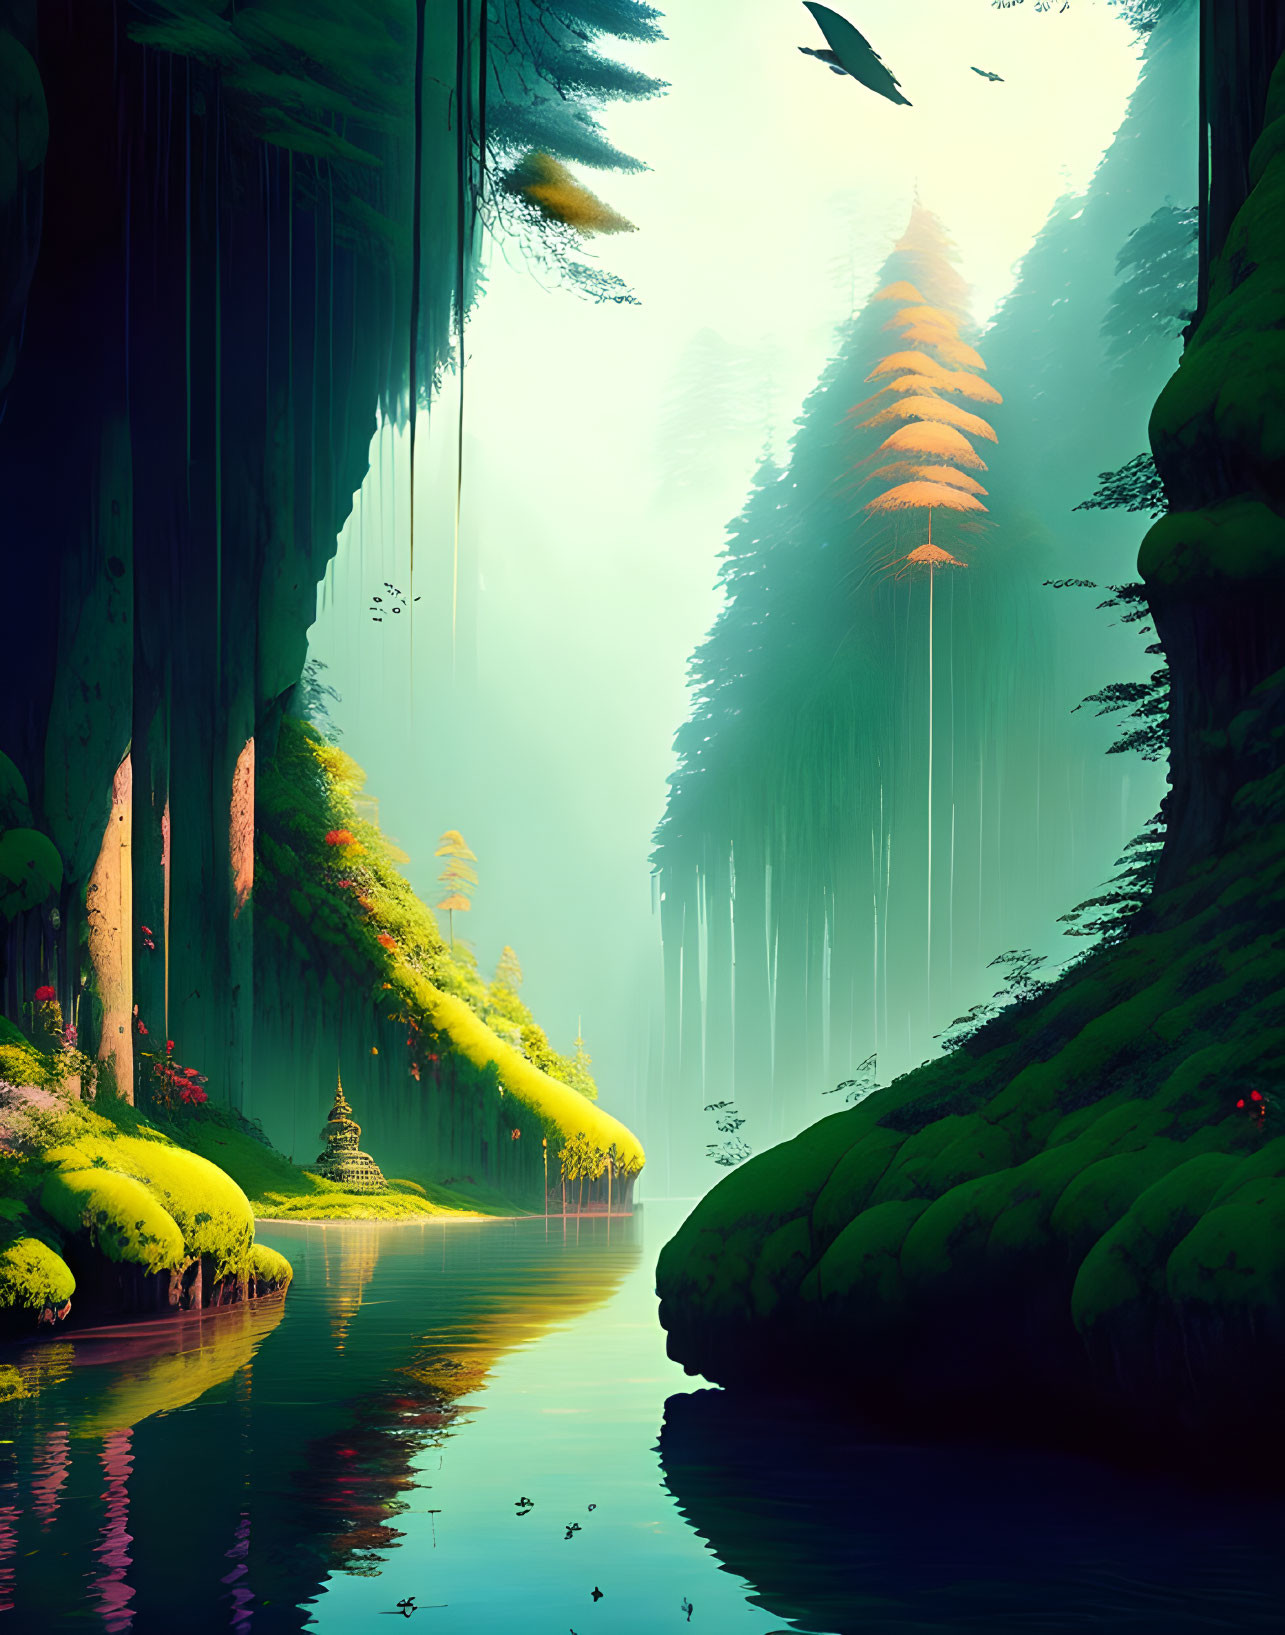 Tranquil forest scene with towering trees, serene river, and lush greenery